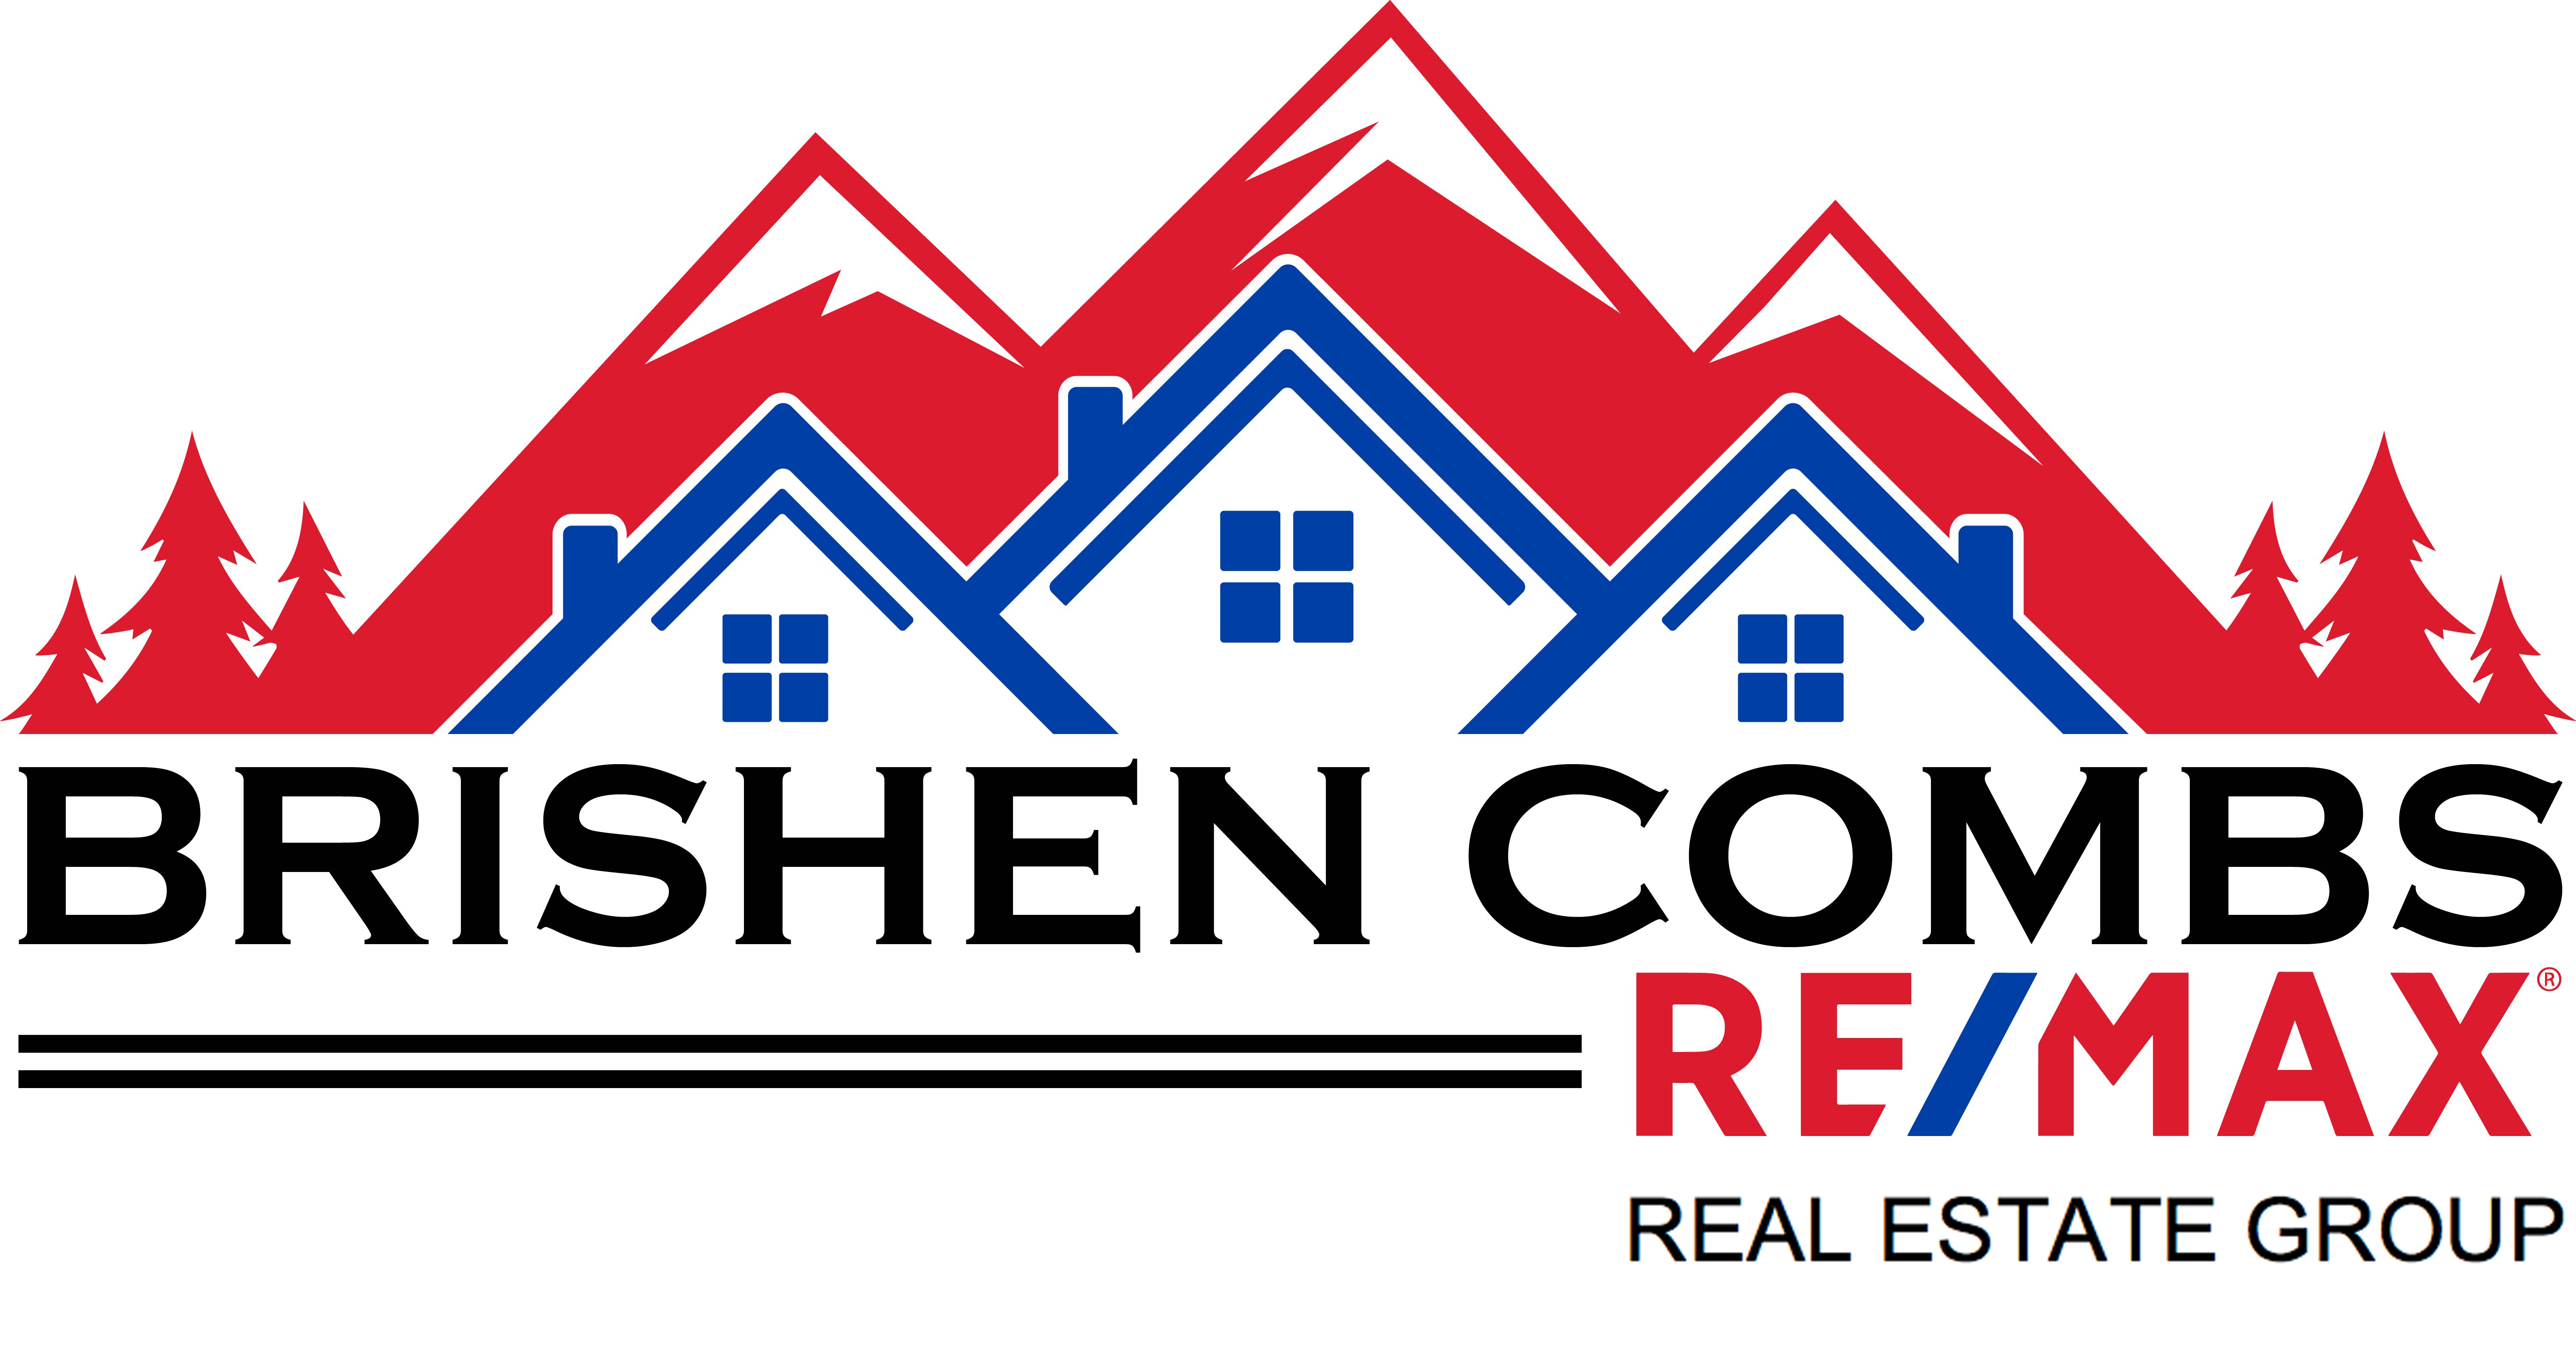 Brishen Combs RE/MAX Real Estate Group